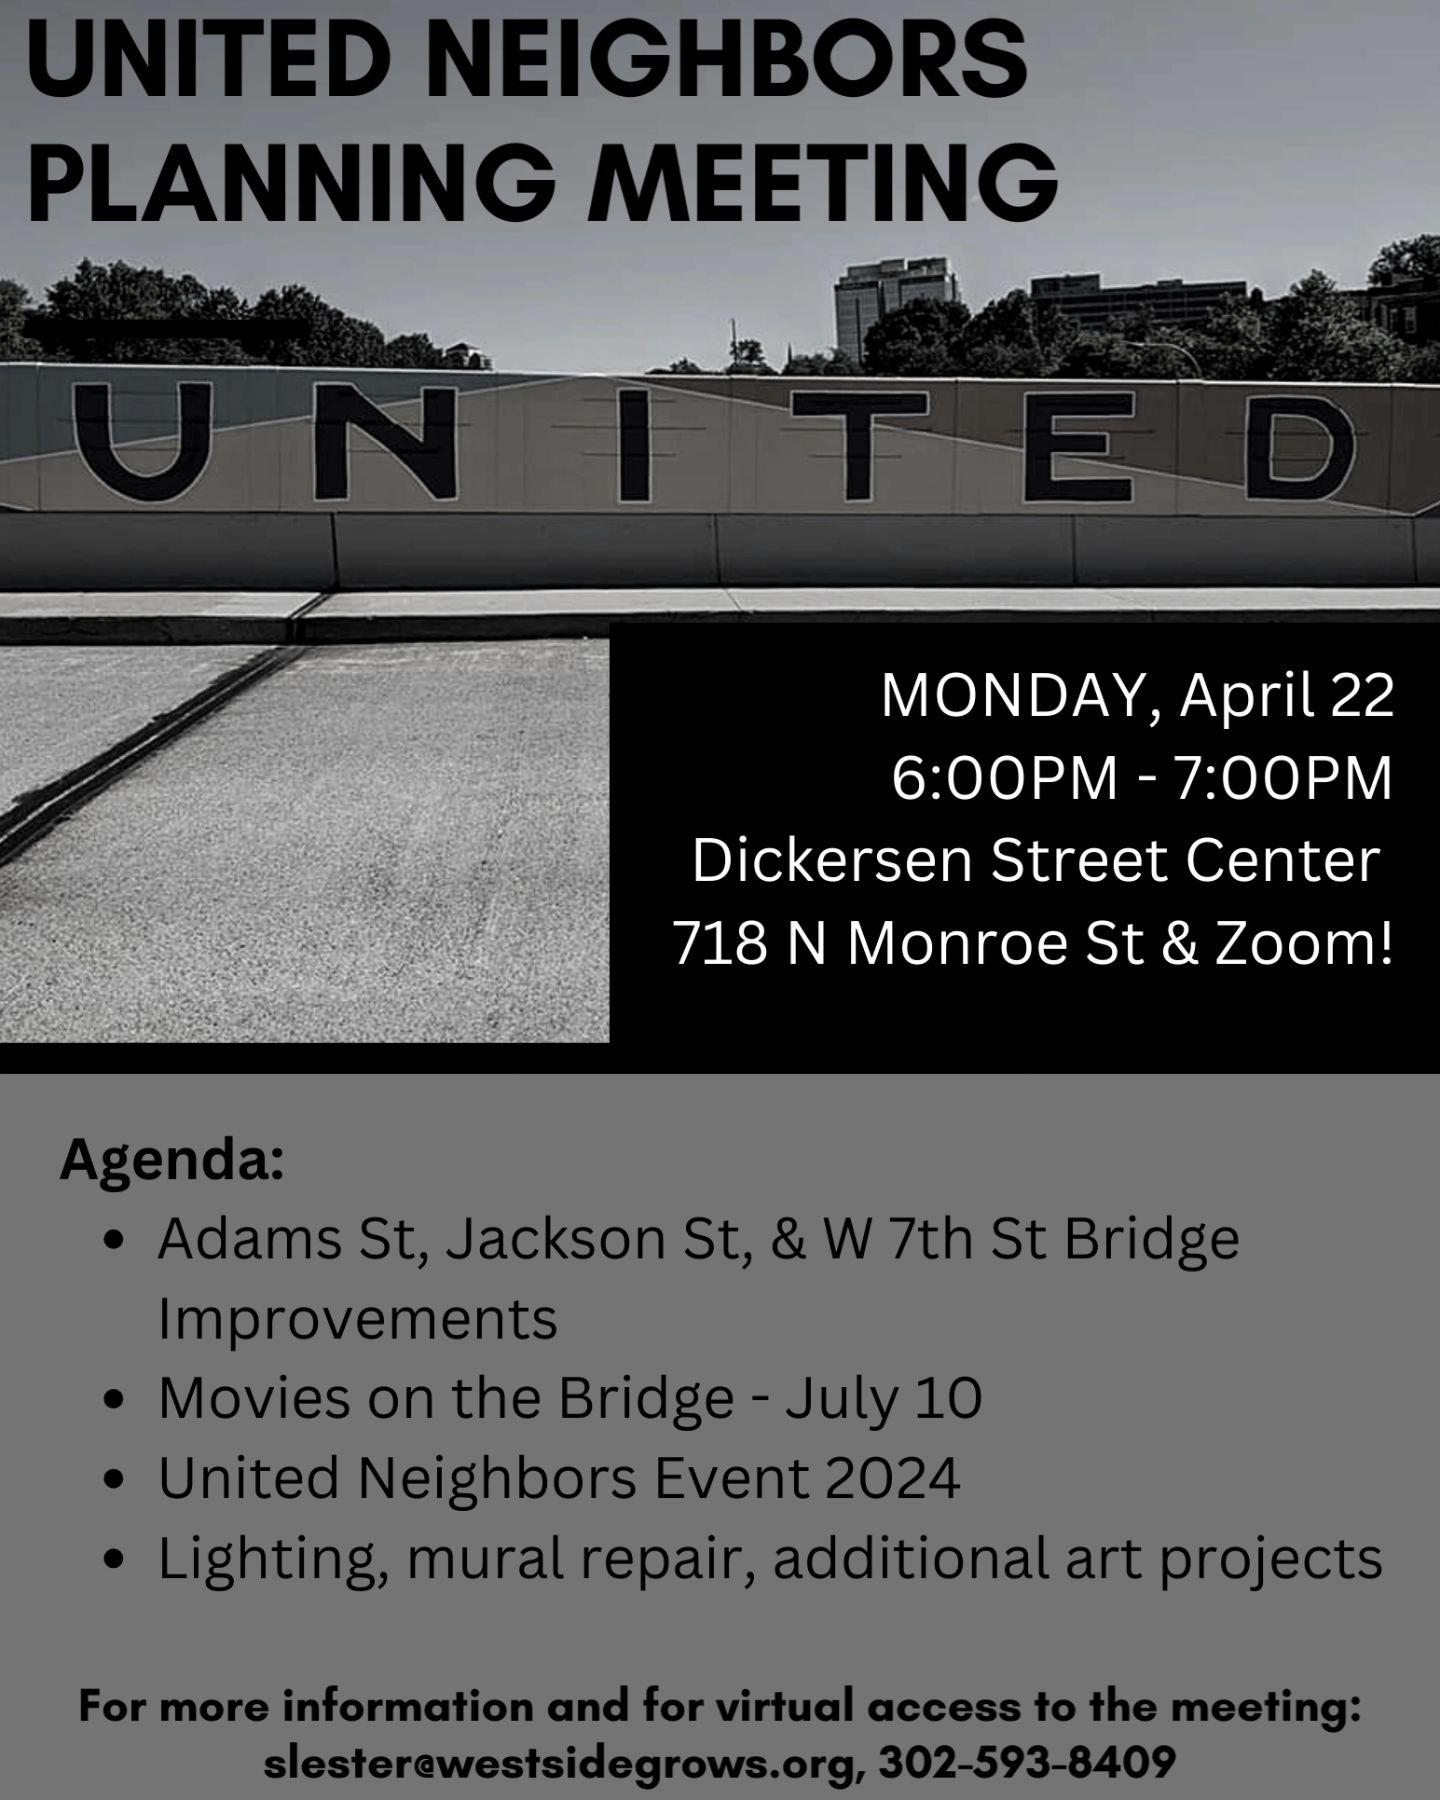 Tonight! Reconvening our United Neighbors Planning Team for the first of several meetings to discuss upcoming improvements and events along I-95 to reconnect our communities across the highway. See you tonight or email Sarah or unitedneighbors@westsi